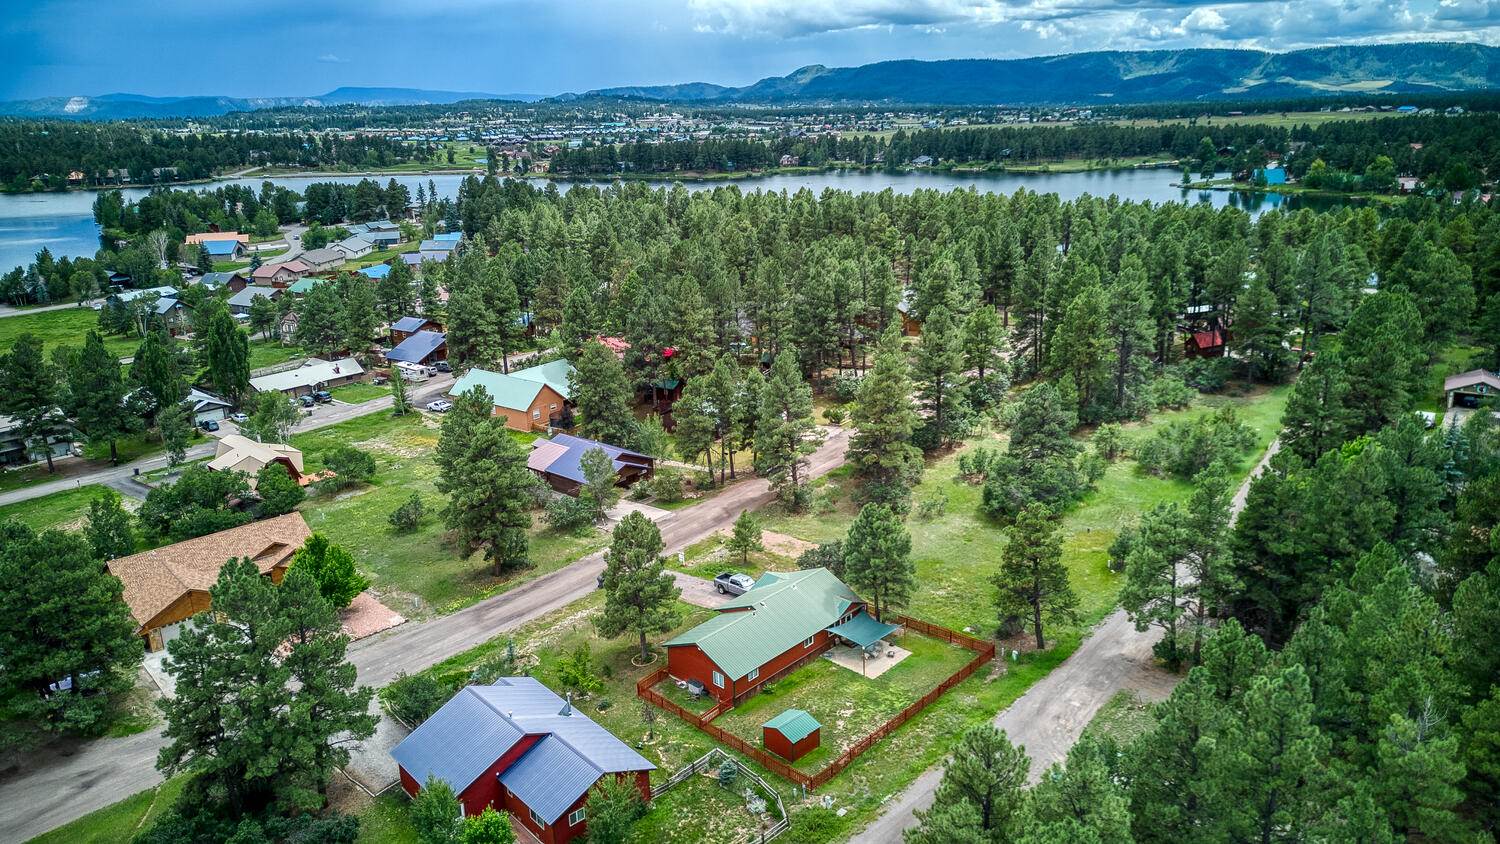 128 Enchanted Place, Pagosa Springs, CO 81147